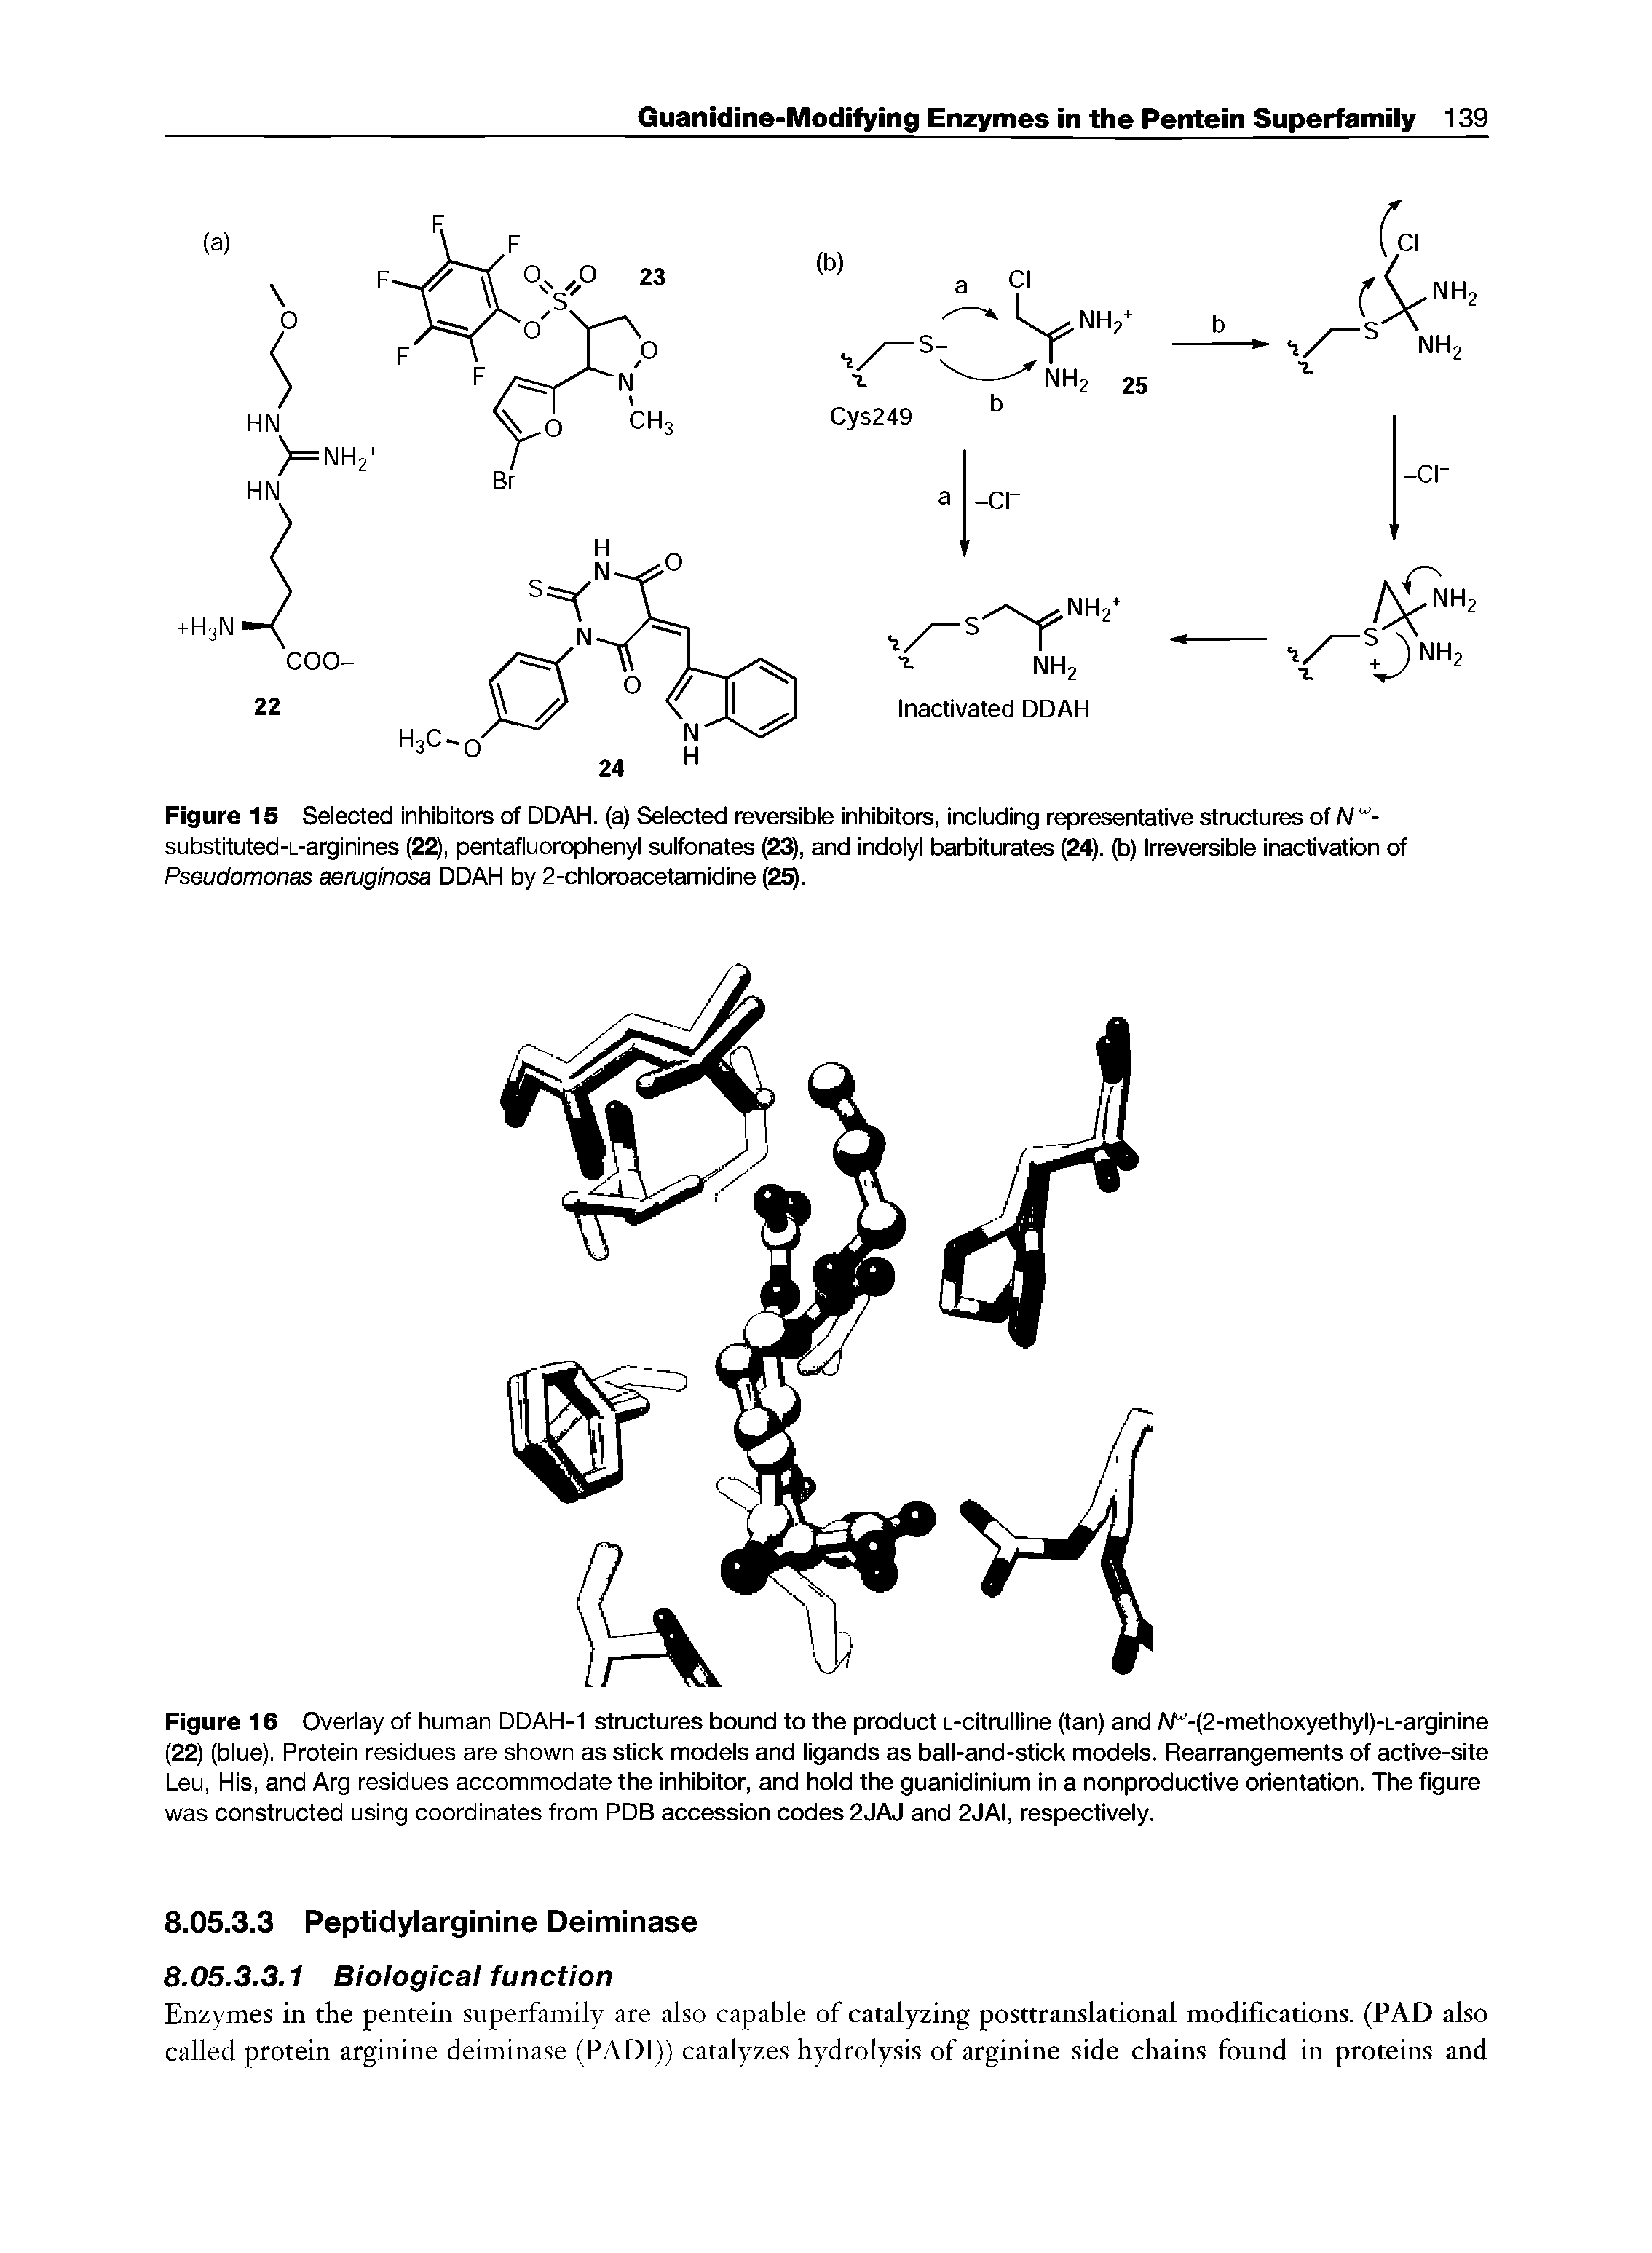 Figure 16 Overiay of human DDAH-1 structures bound to the product L-citrulline (tan) and A/ -(2-methoxyethyl)-L-arginine (22) (biue). Protein residues are shown as stick models and ligands as ball-and-stick models. Rearrangements of active-site Leu, His, and Arg residues accommodate the inhibitor, and hold the guanidinium in a nonproductive orientation. The figure was constructed using coordinates from PDB accession codes 2JAJ and 2JAI, respectively.